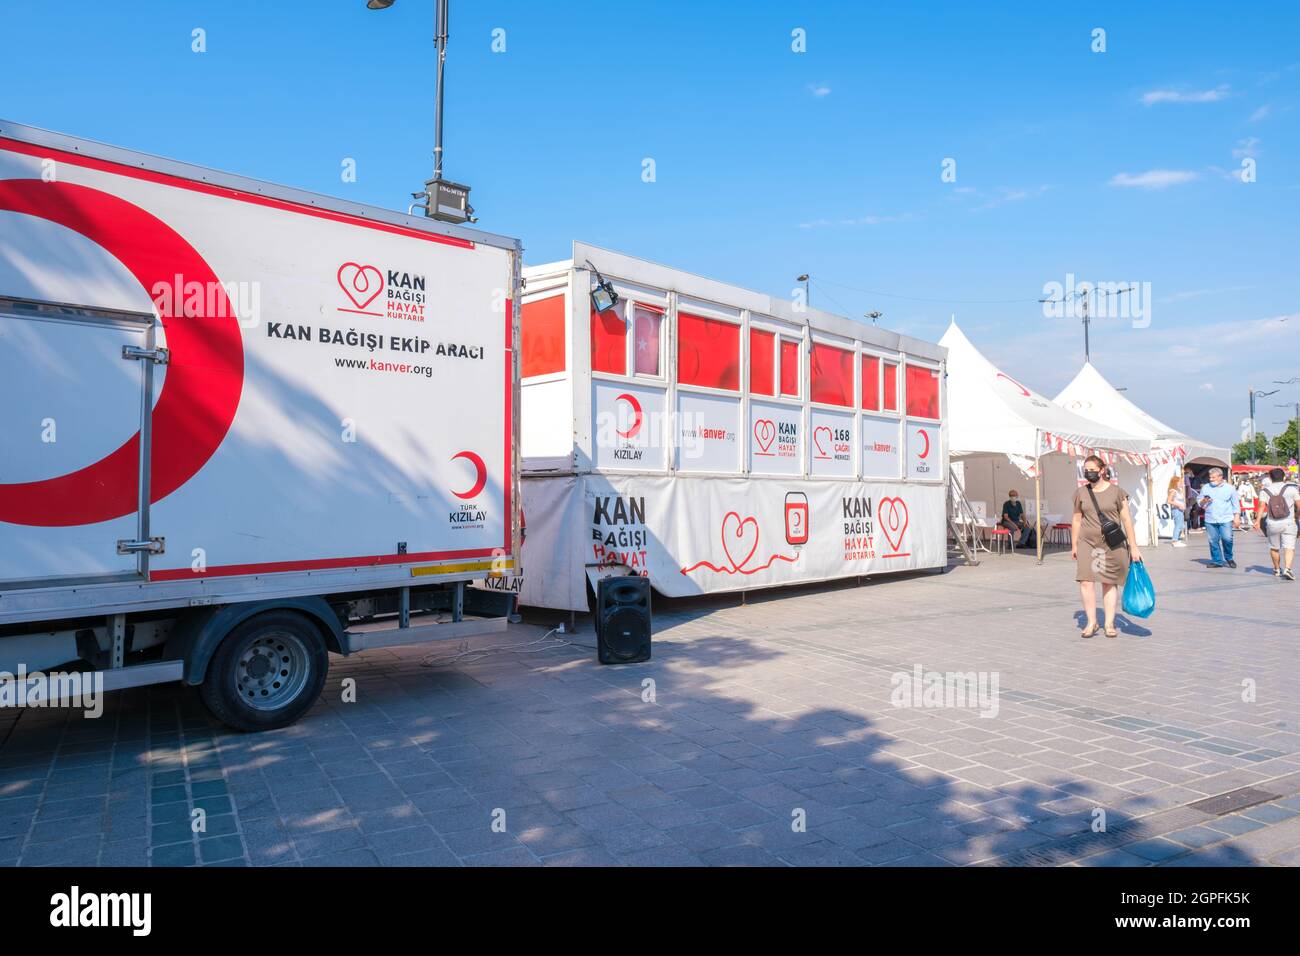 Eminonu, Istanbul, Turkey - 07.05.2021: operation field of Turkish Red Crescent (Türk Kizilay) parked in square in a hot summer day with copy space an Stock Photo